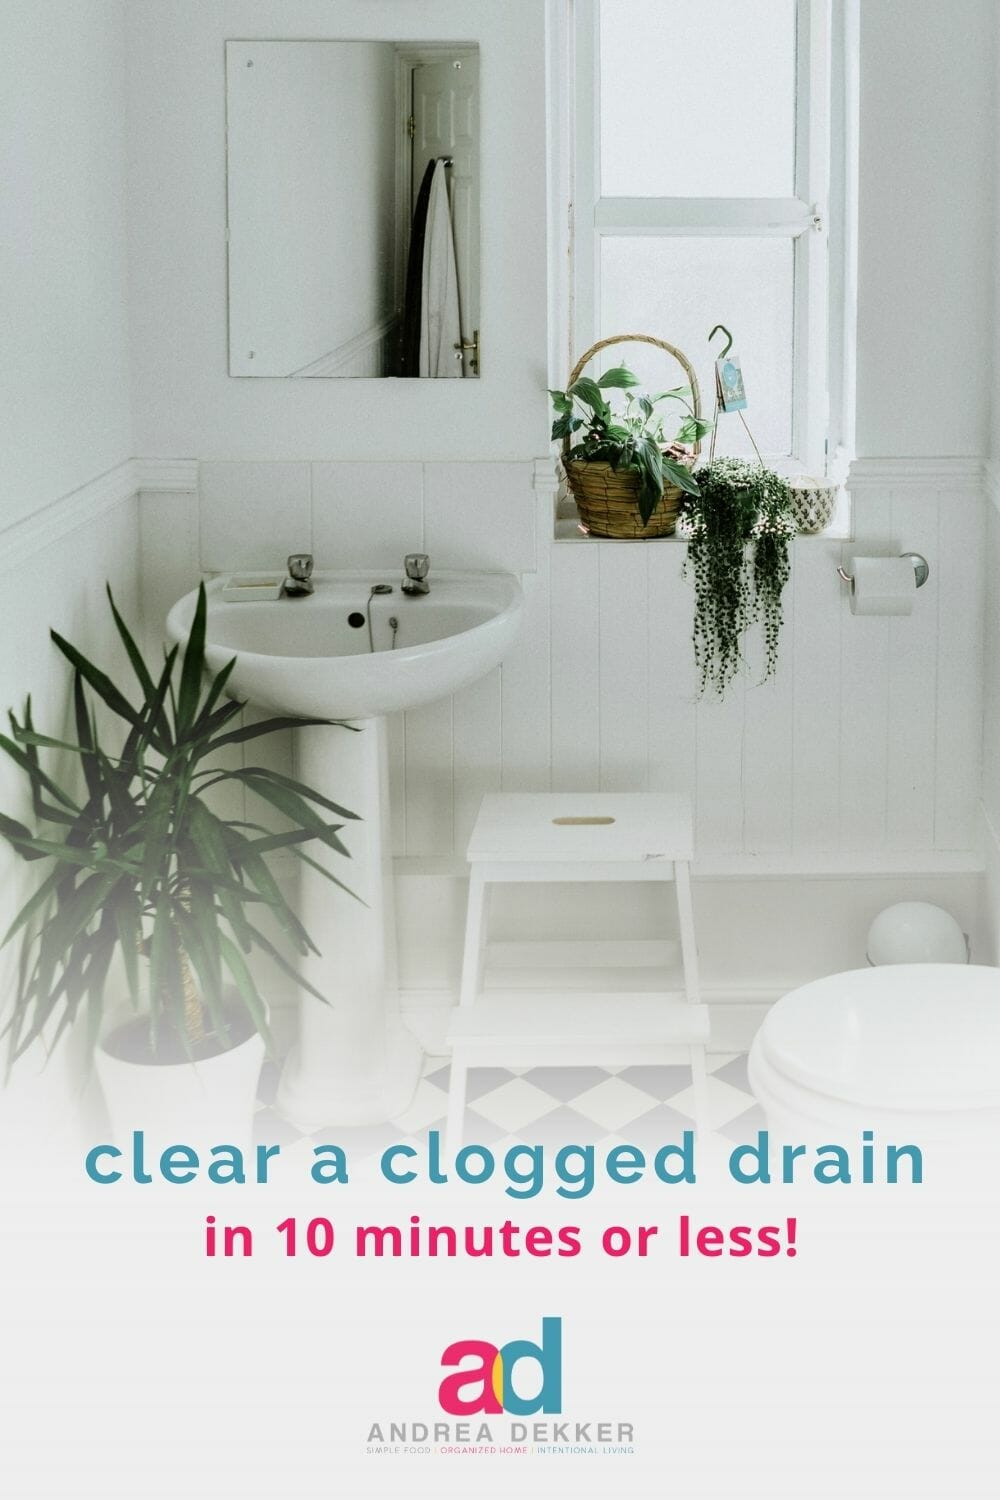 Are you tired of using expensive, toxic chemicals to clean your home? Learn you how to quickly clear a clogged drain using edible ingredients from your kitchen pantry! via @andreadekker